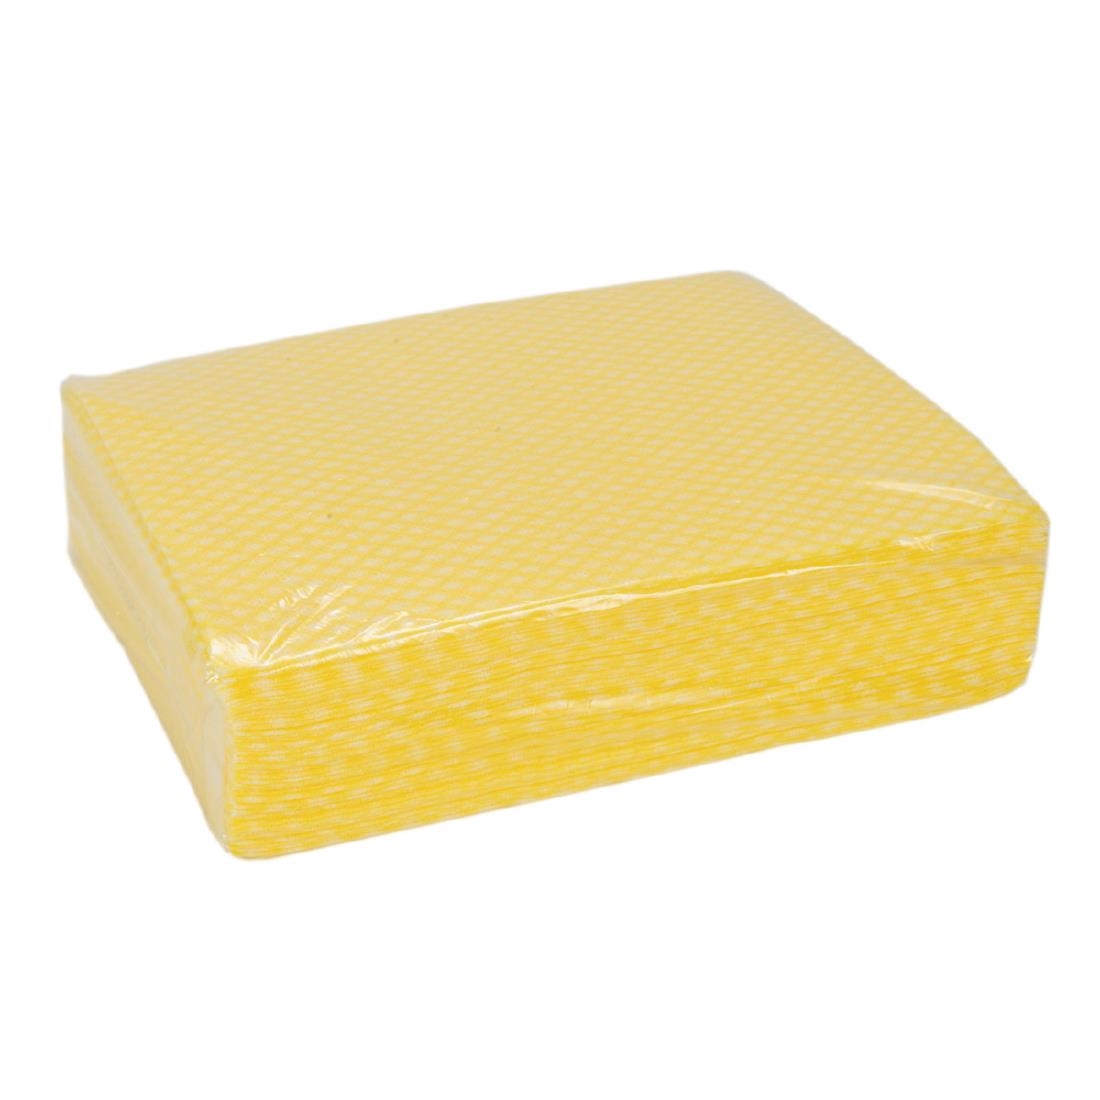 All-Purpose Non-Woven Cleaning Cloths Yellow (Pack of 500)